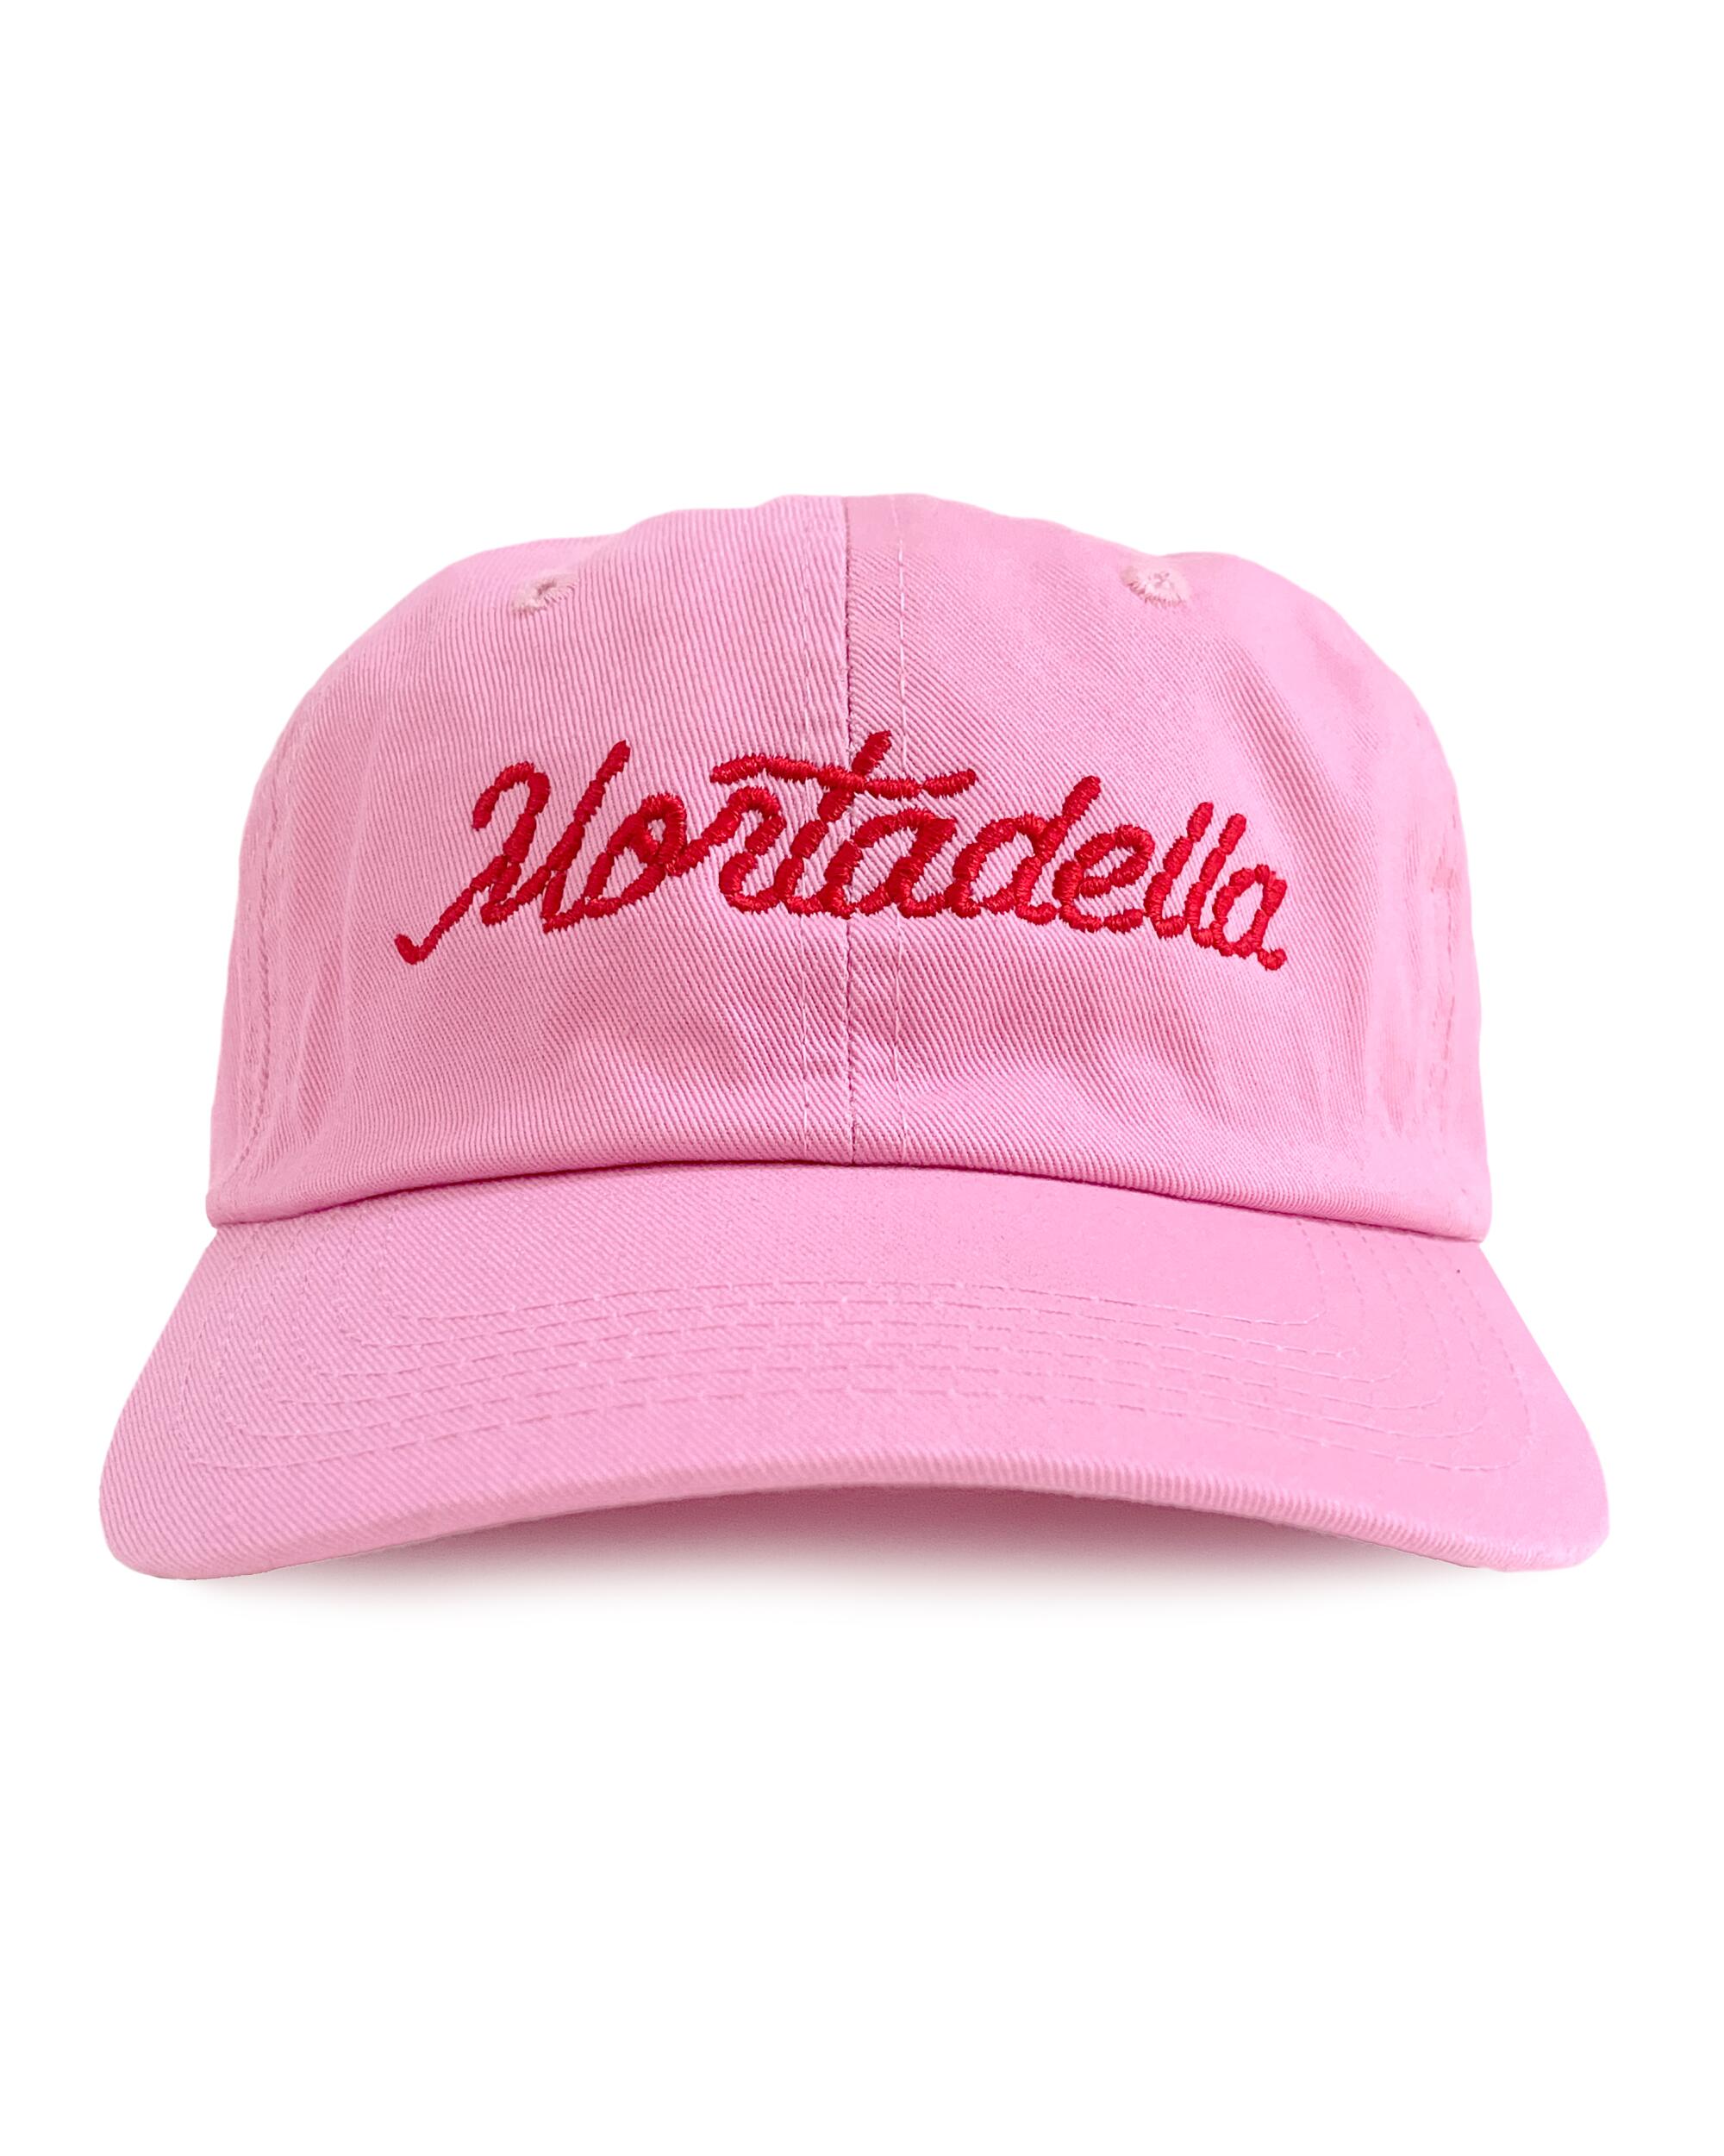 A pink hat that says Mortadella from Mister Parmesan